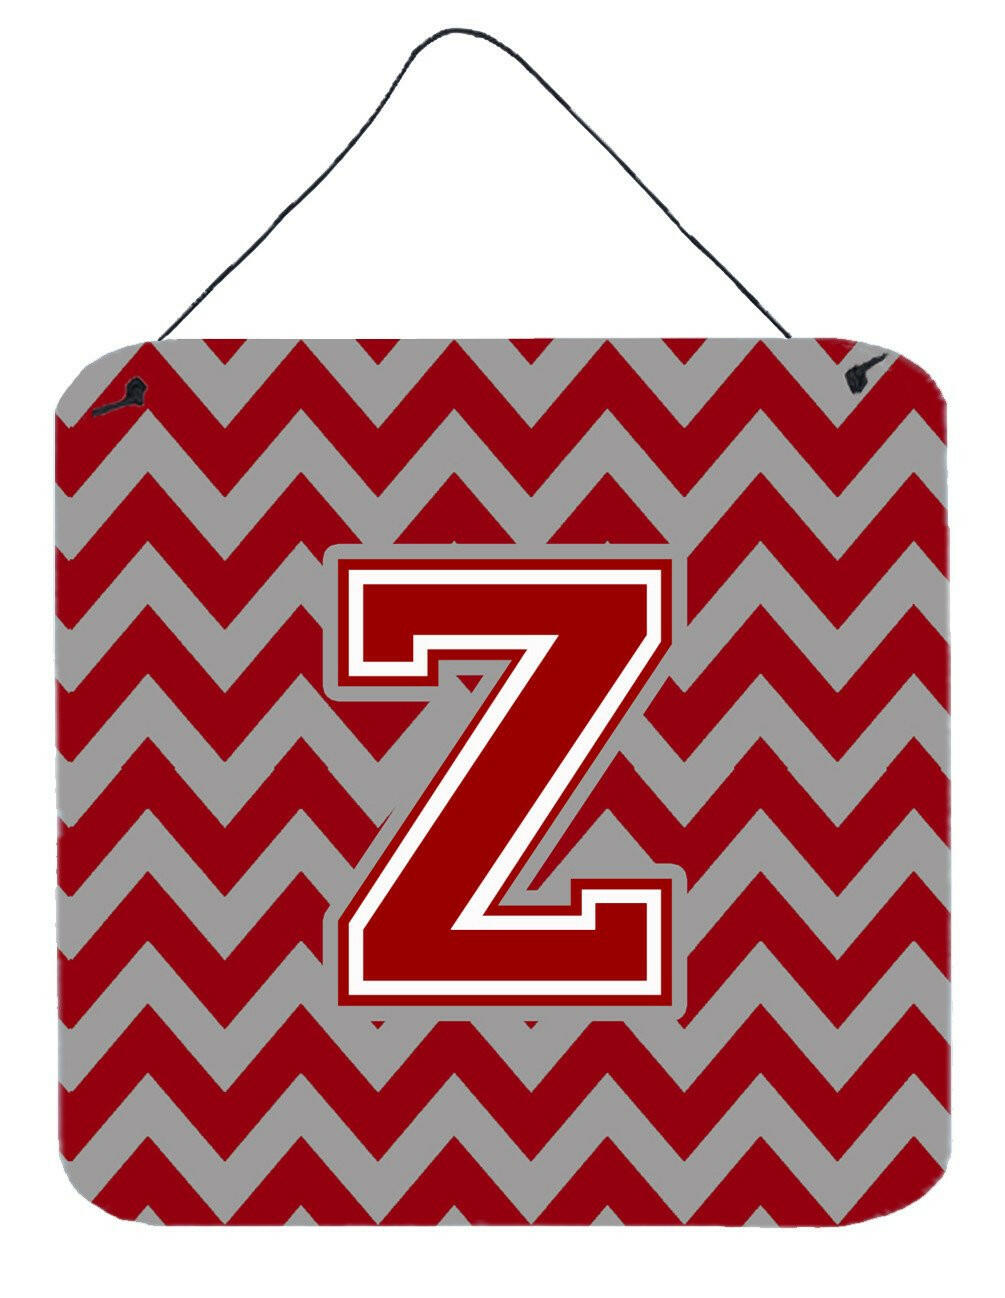 Letter Z Chevron Maroon and White Wall or Door Hanging Prints CJ1049-ZDS66 by Caroline's Treasures